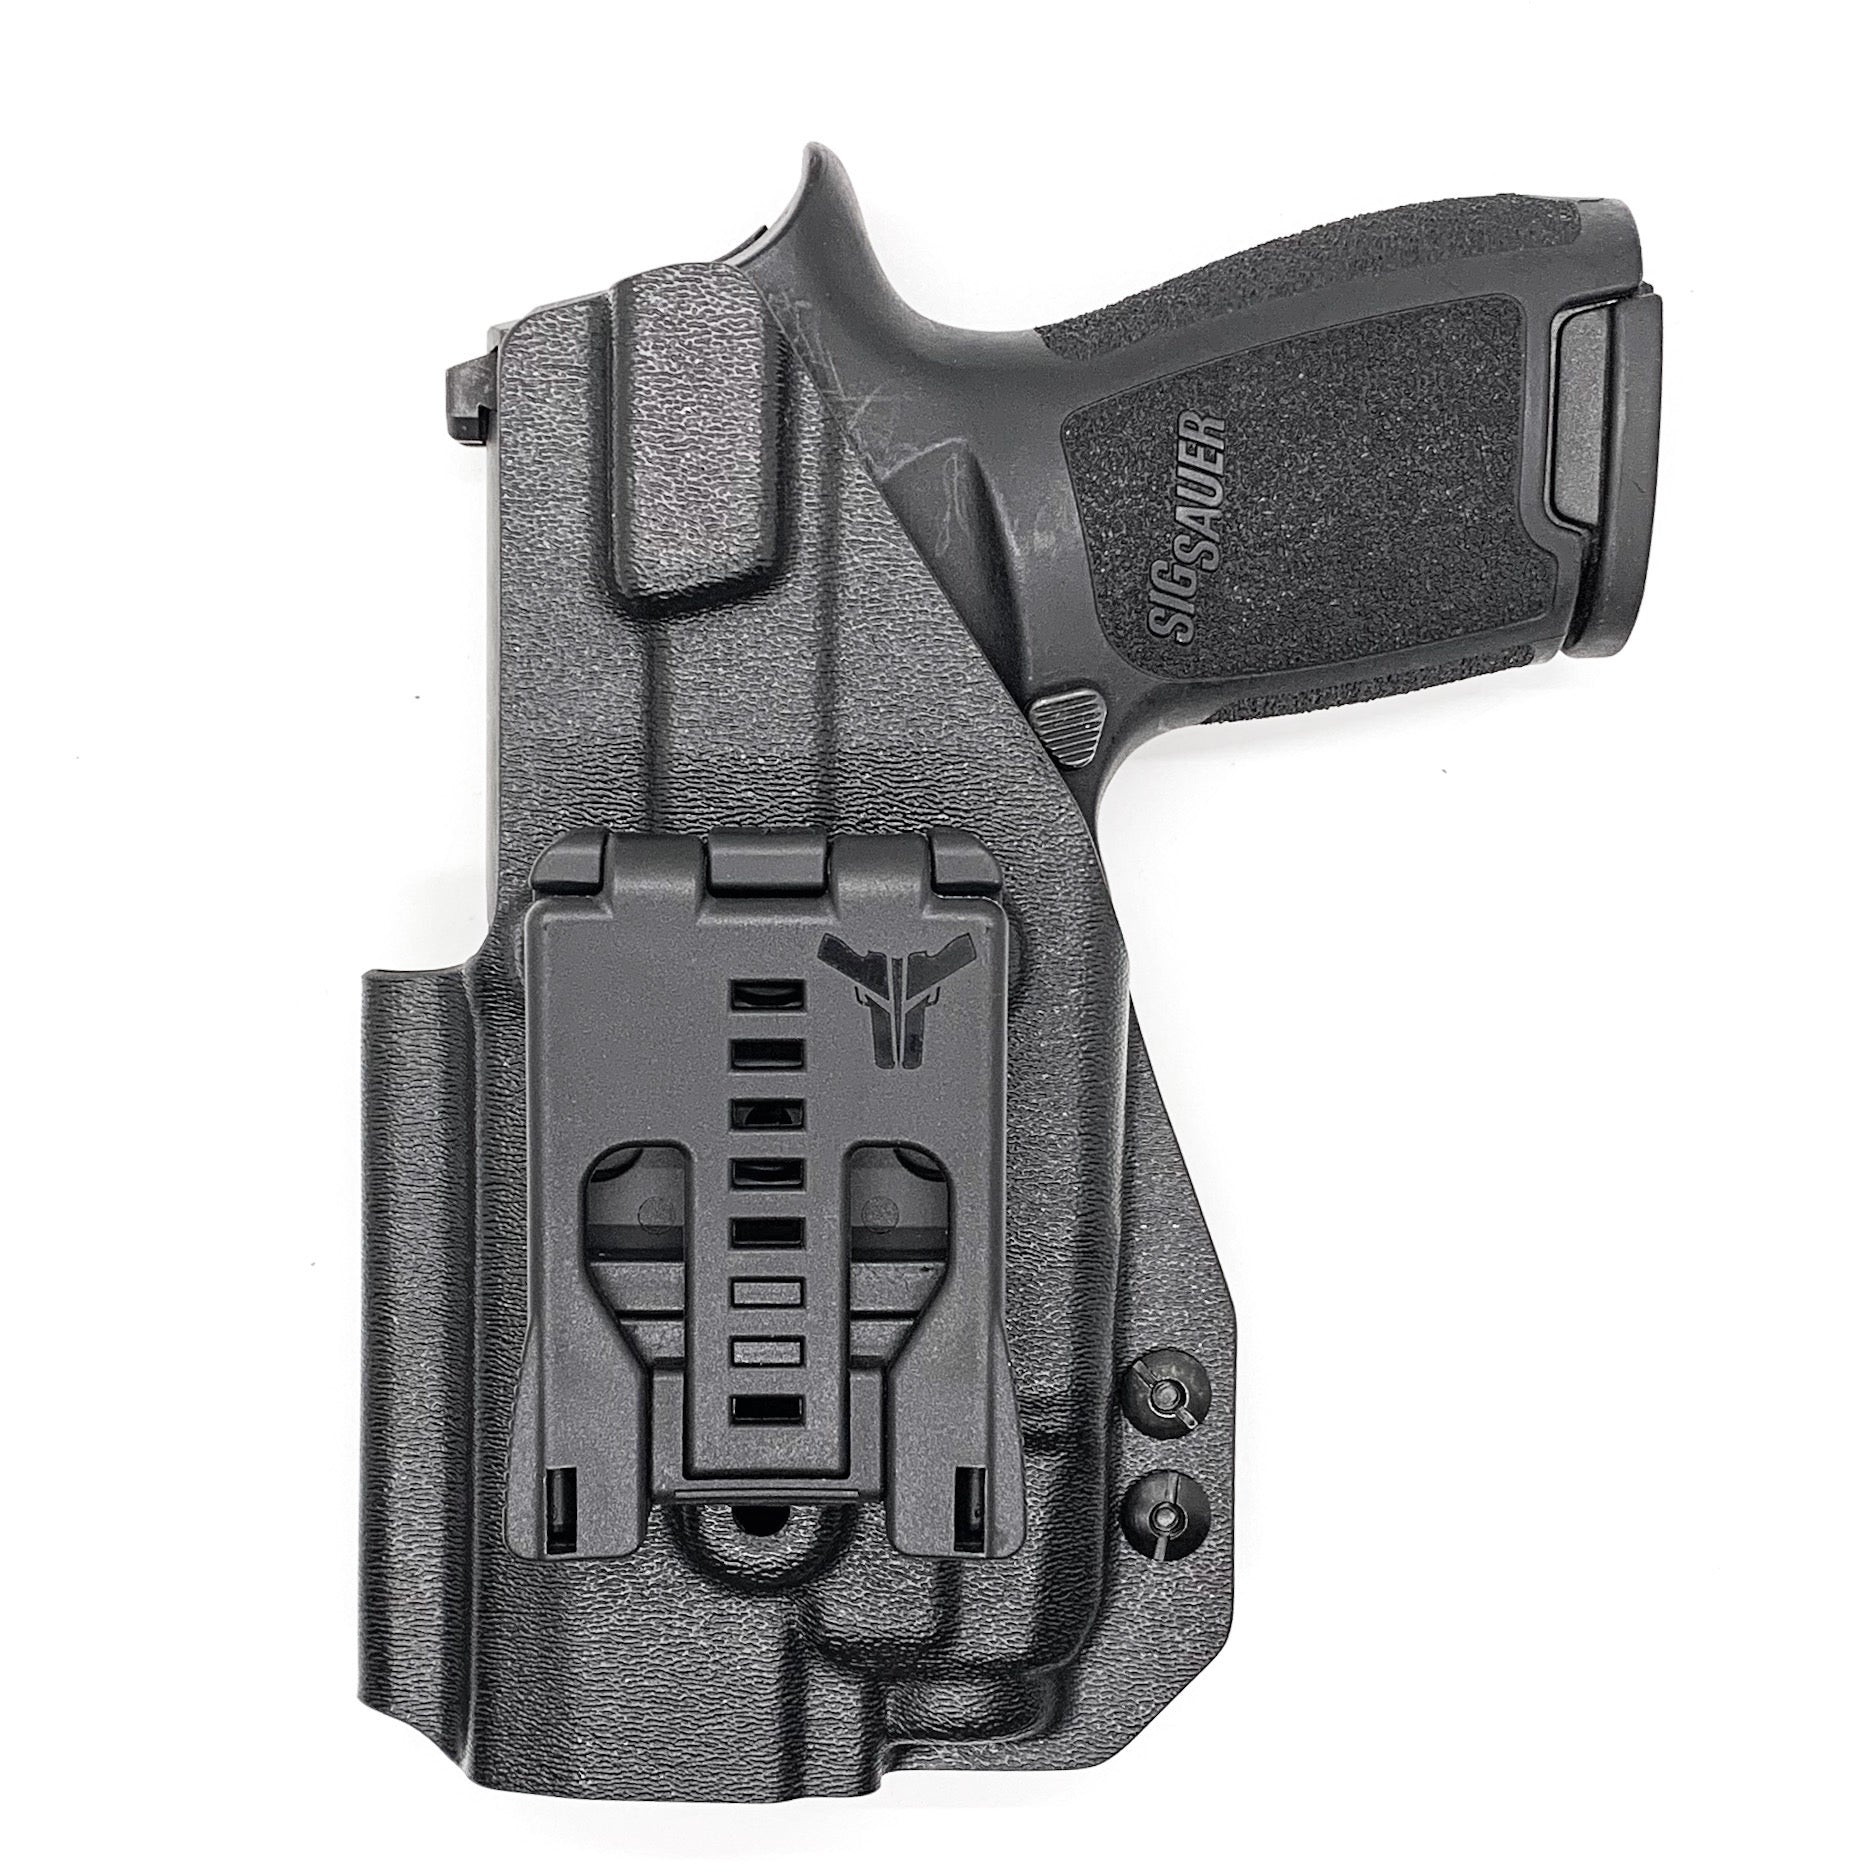 Our Outside Waistband holster for the Sig Sauer P320 Compact and Carry with the Streamlight TLR-7 or TLR-7A is vacuum formed with a precision machined mold designed from a CAD model of the actual firearm and light. The amount of retention is easily adjusted so that the fit can be dialed into your personal preference. 